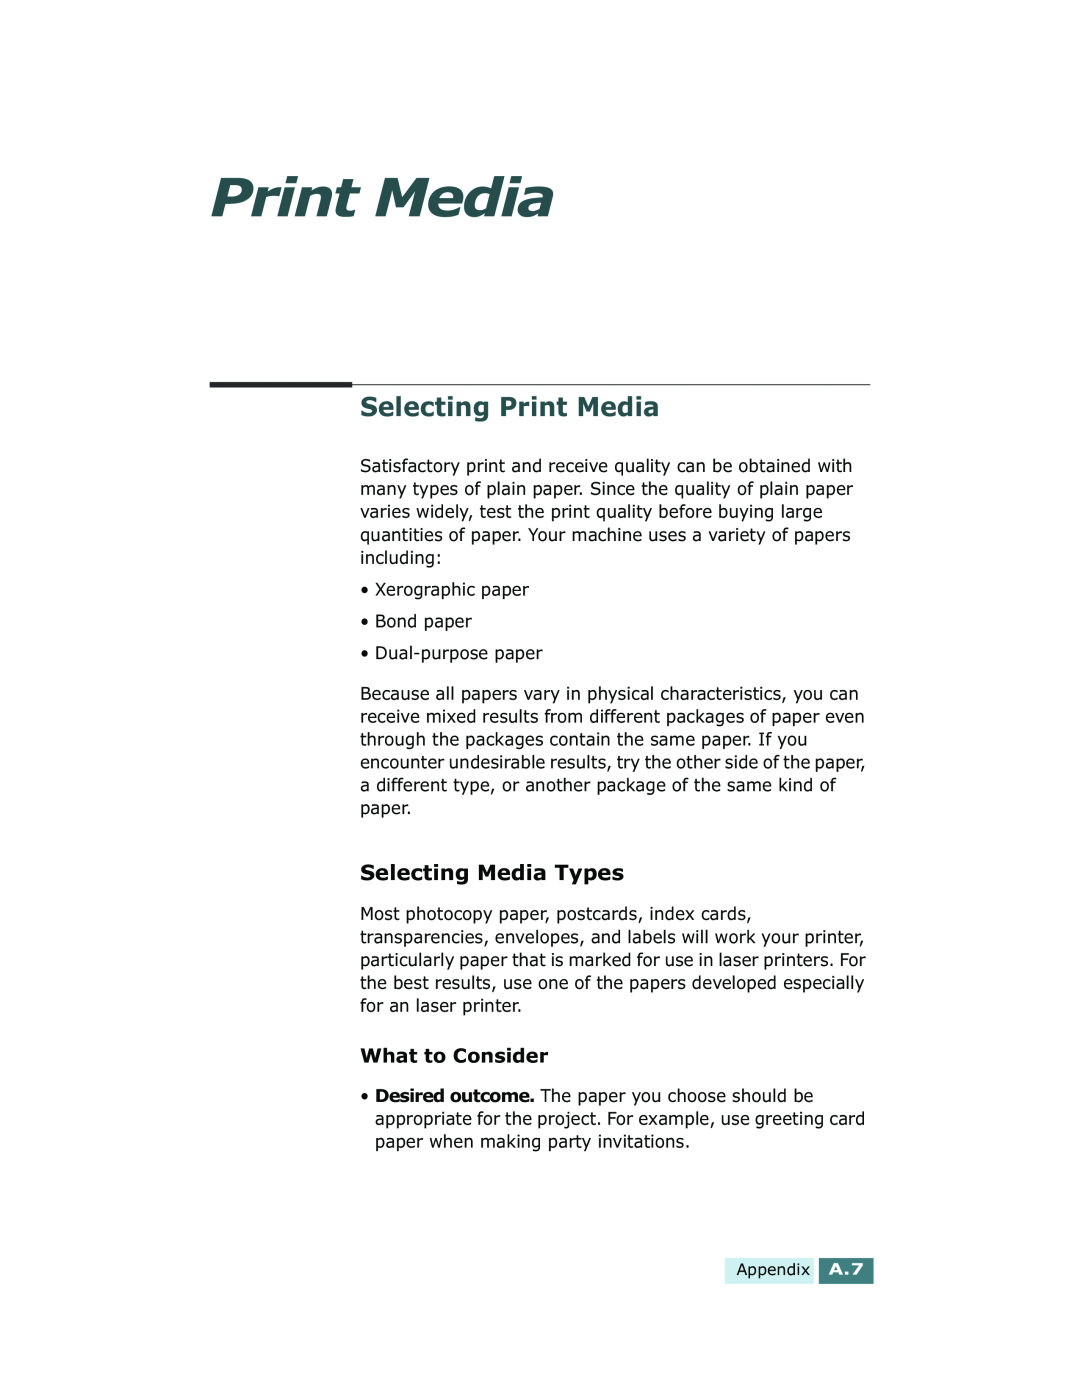 Xerox Pro 580 manual Selecting Print Media, Selecting Media Types, What to Consider, Appendix A.7 